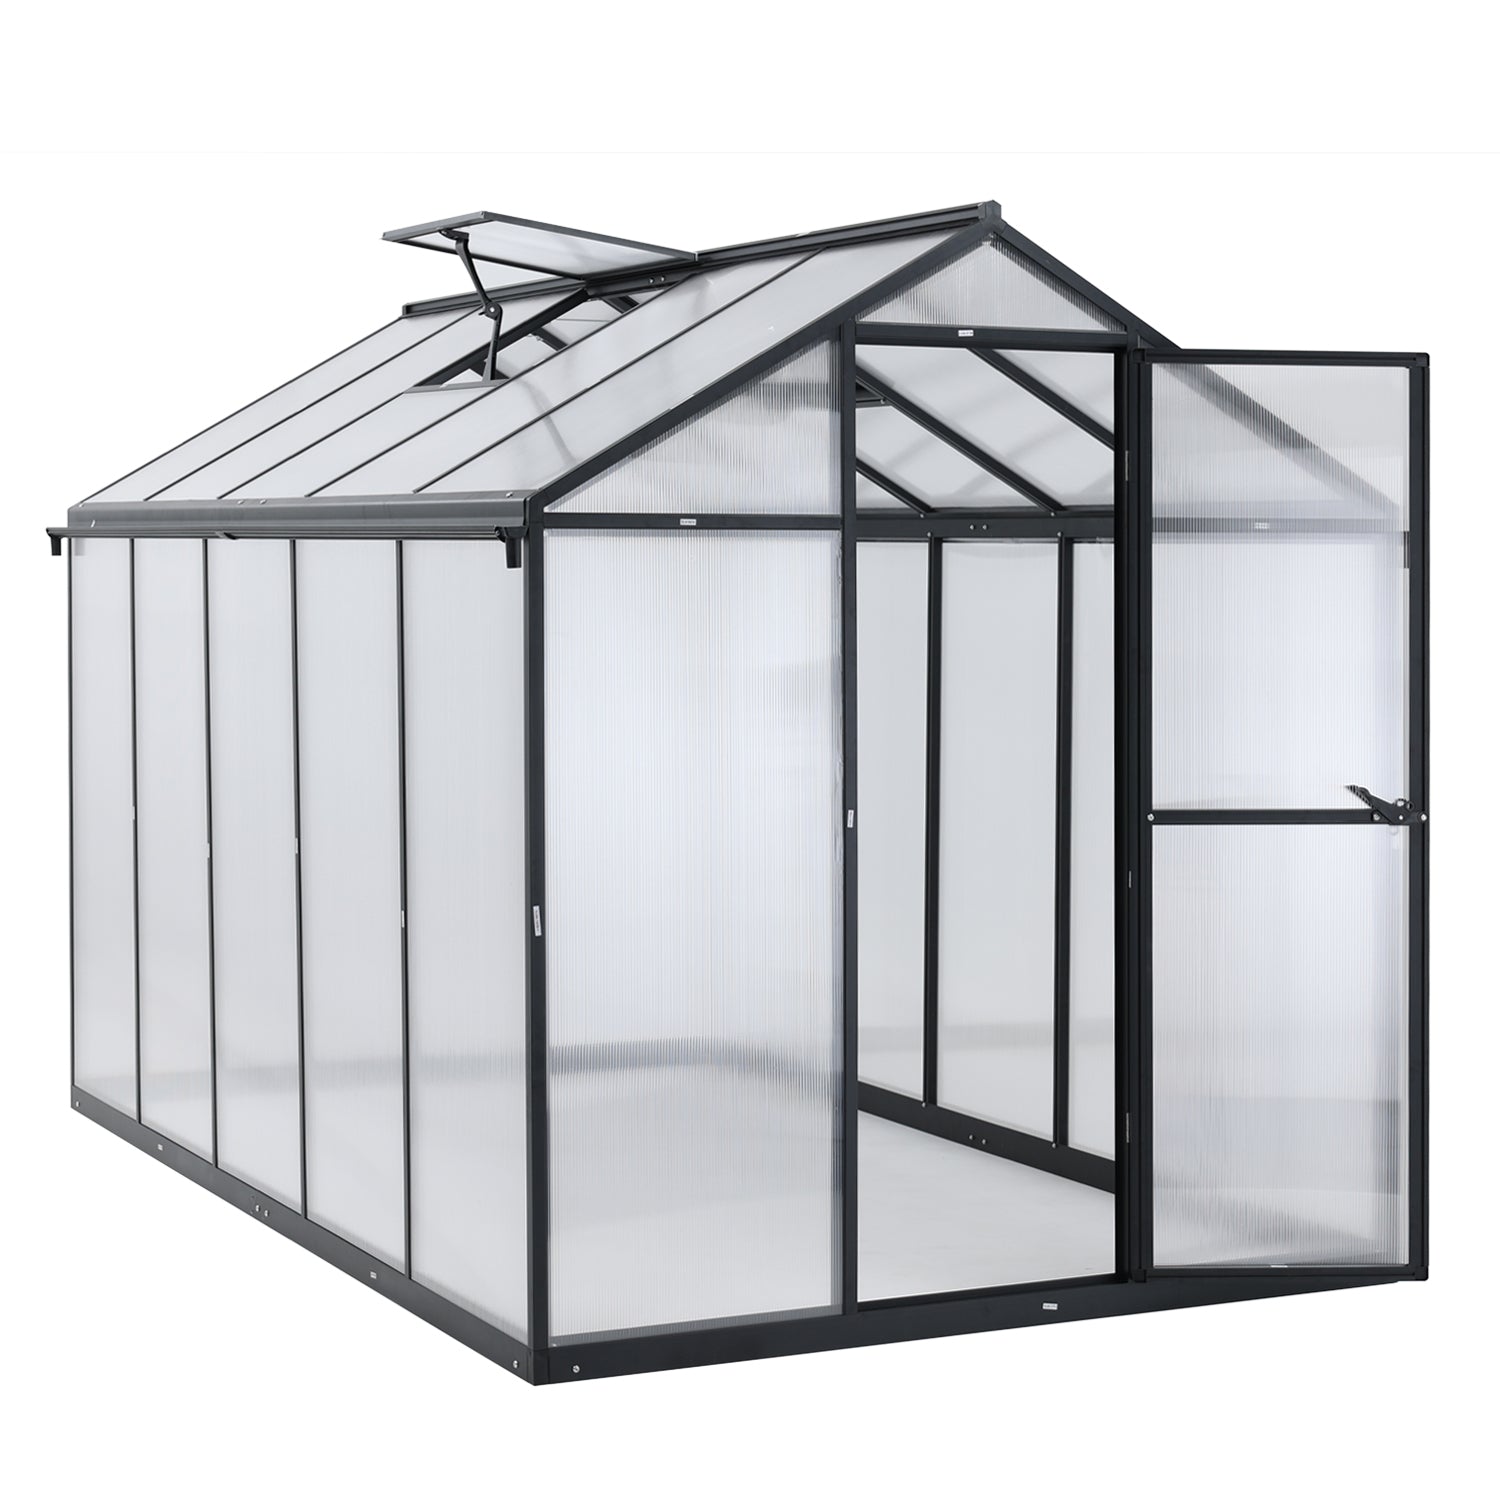 6' x 8' /6' x 10' Walk-in Polycarbonate Greenhouse with Roof Vent and Door lock,  Aluminum Frame and Polycarbonate Panels- White/Black  Aoodor LLC 6' x 10' Black 